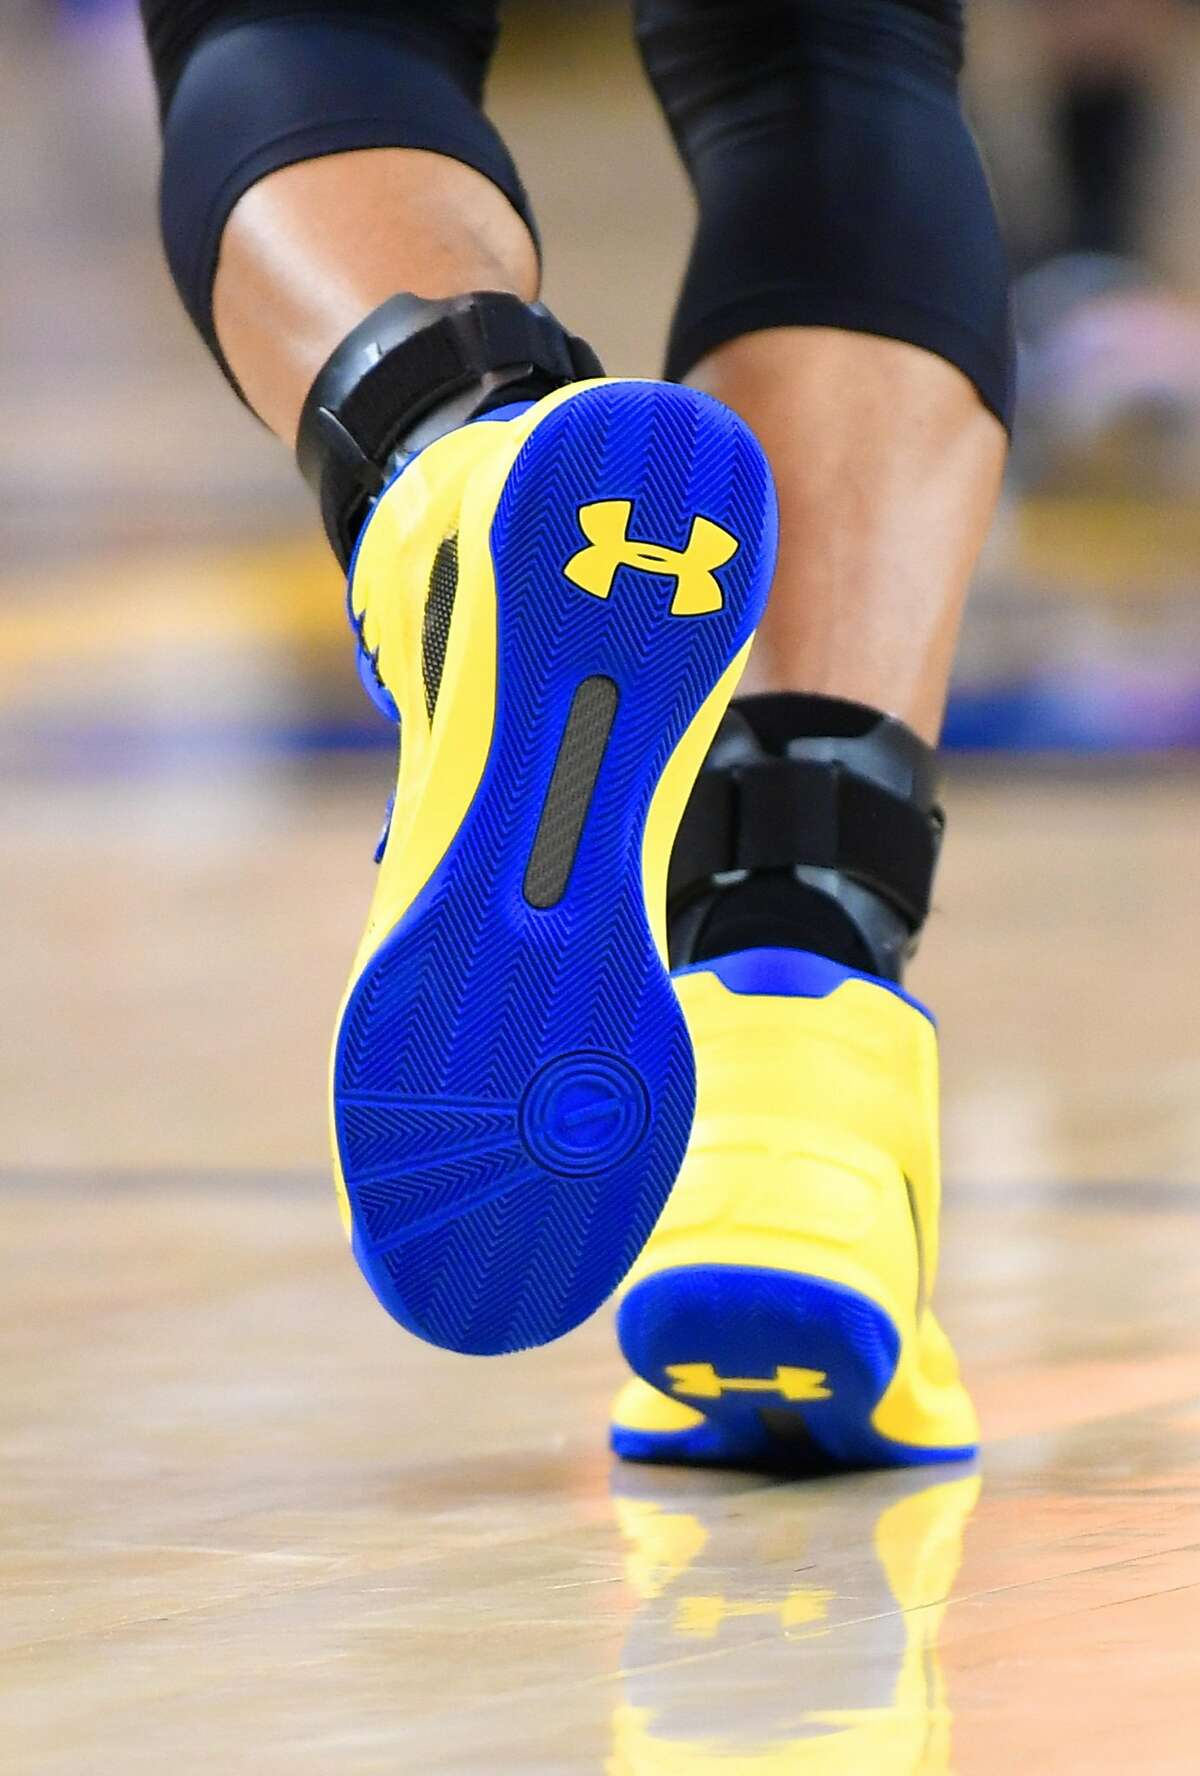 conductor vía Exquisito Under Armour disappointed with Curry 3 sales